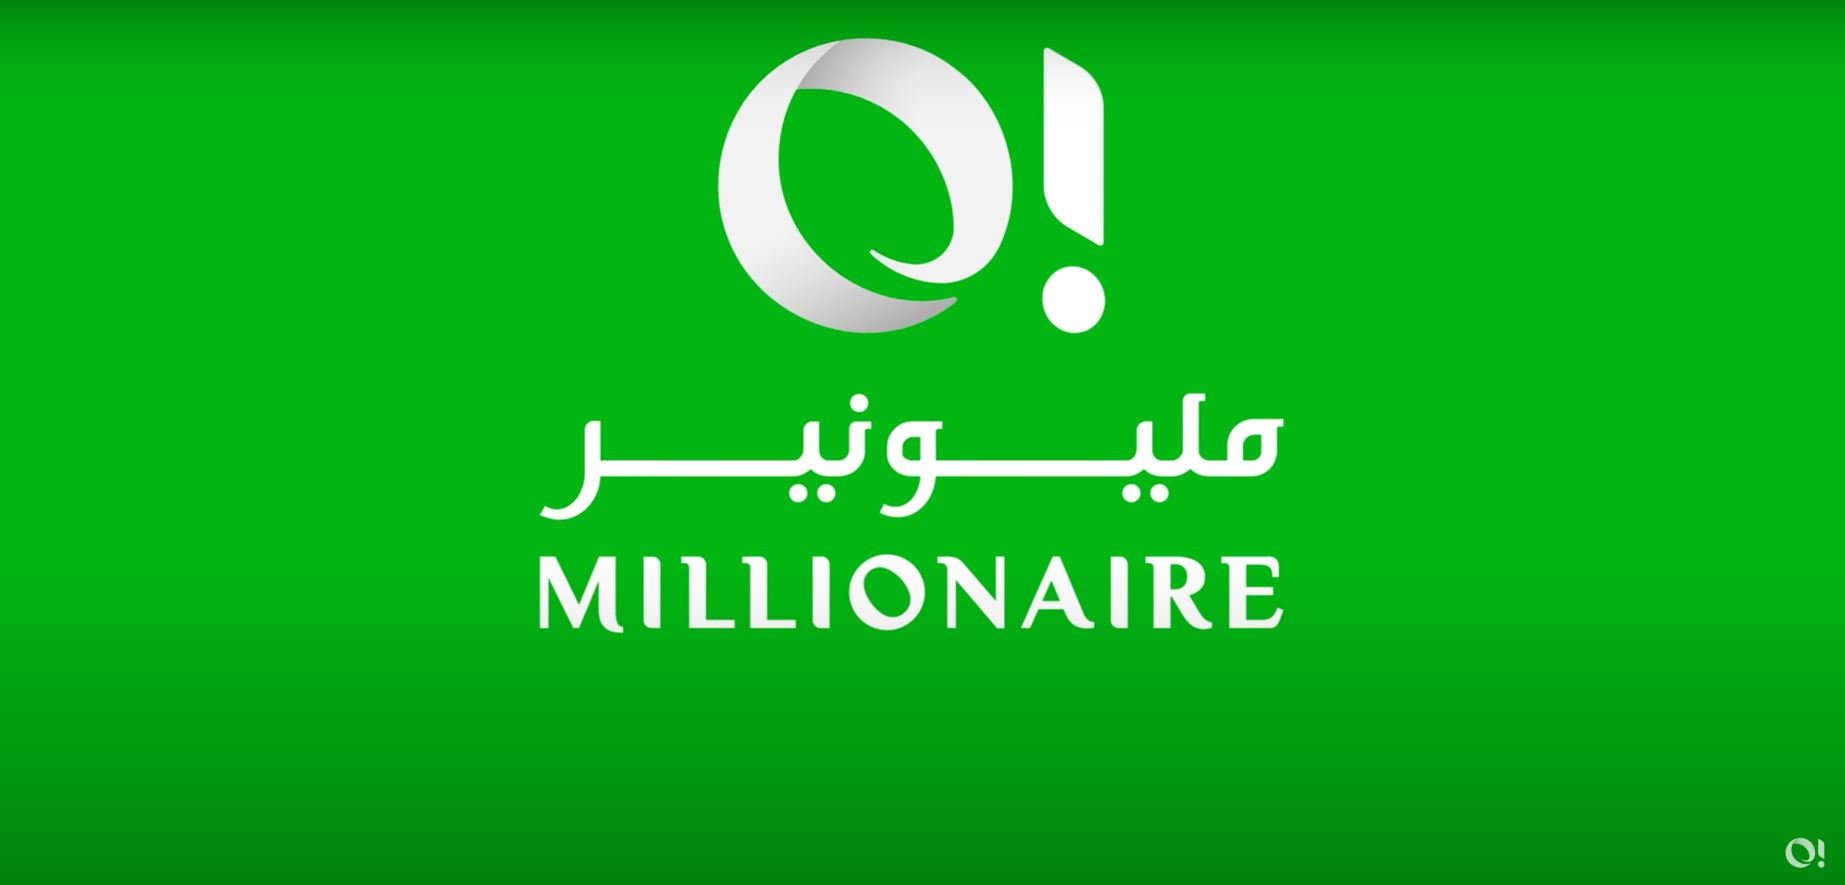 OMillionaire results